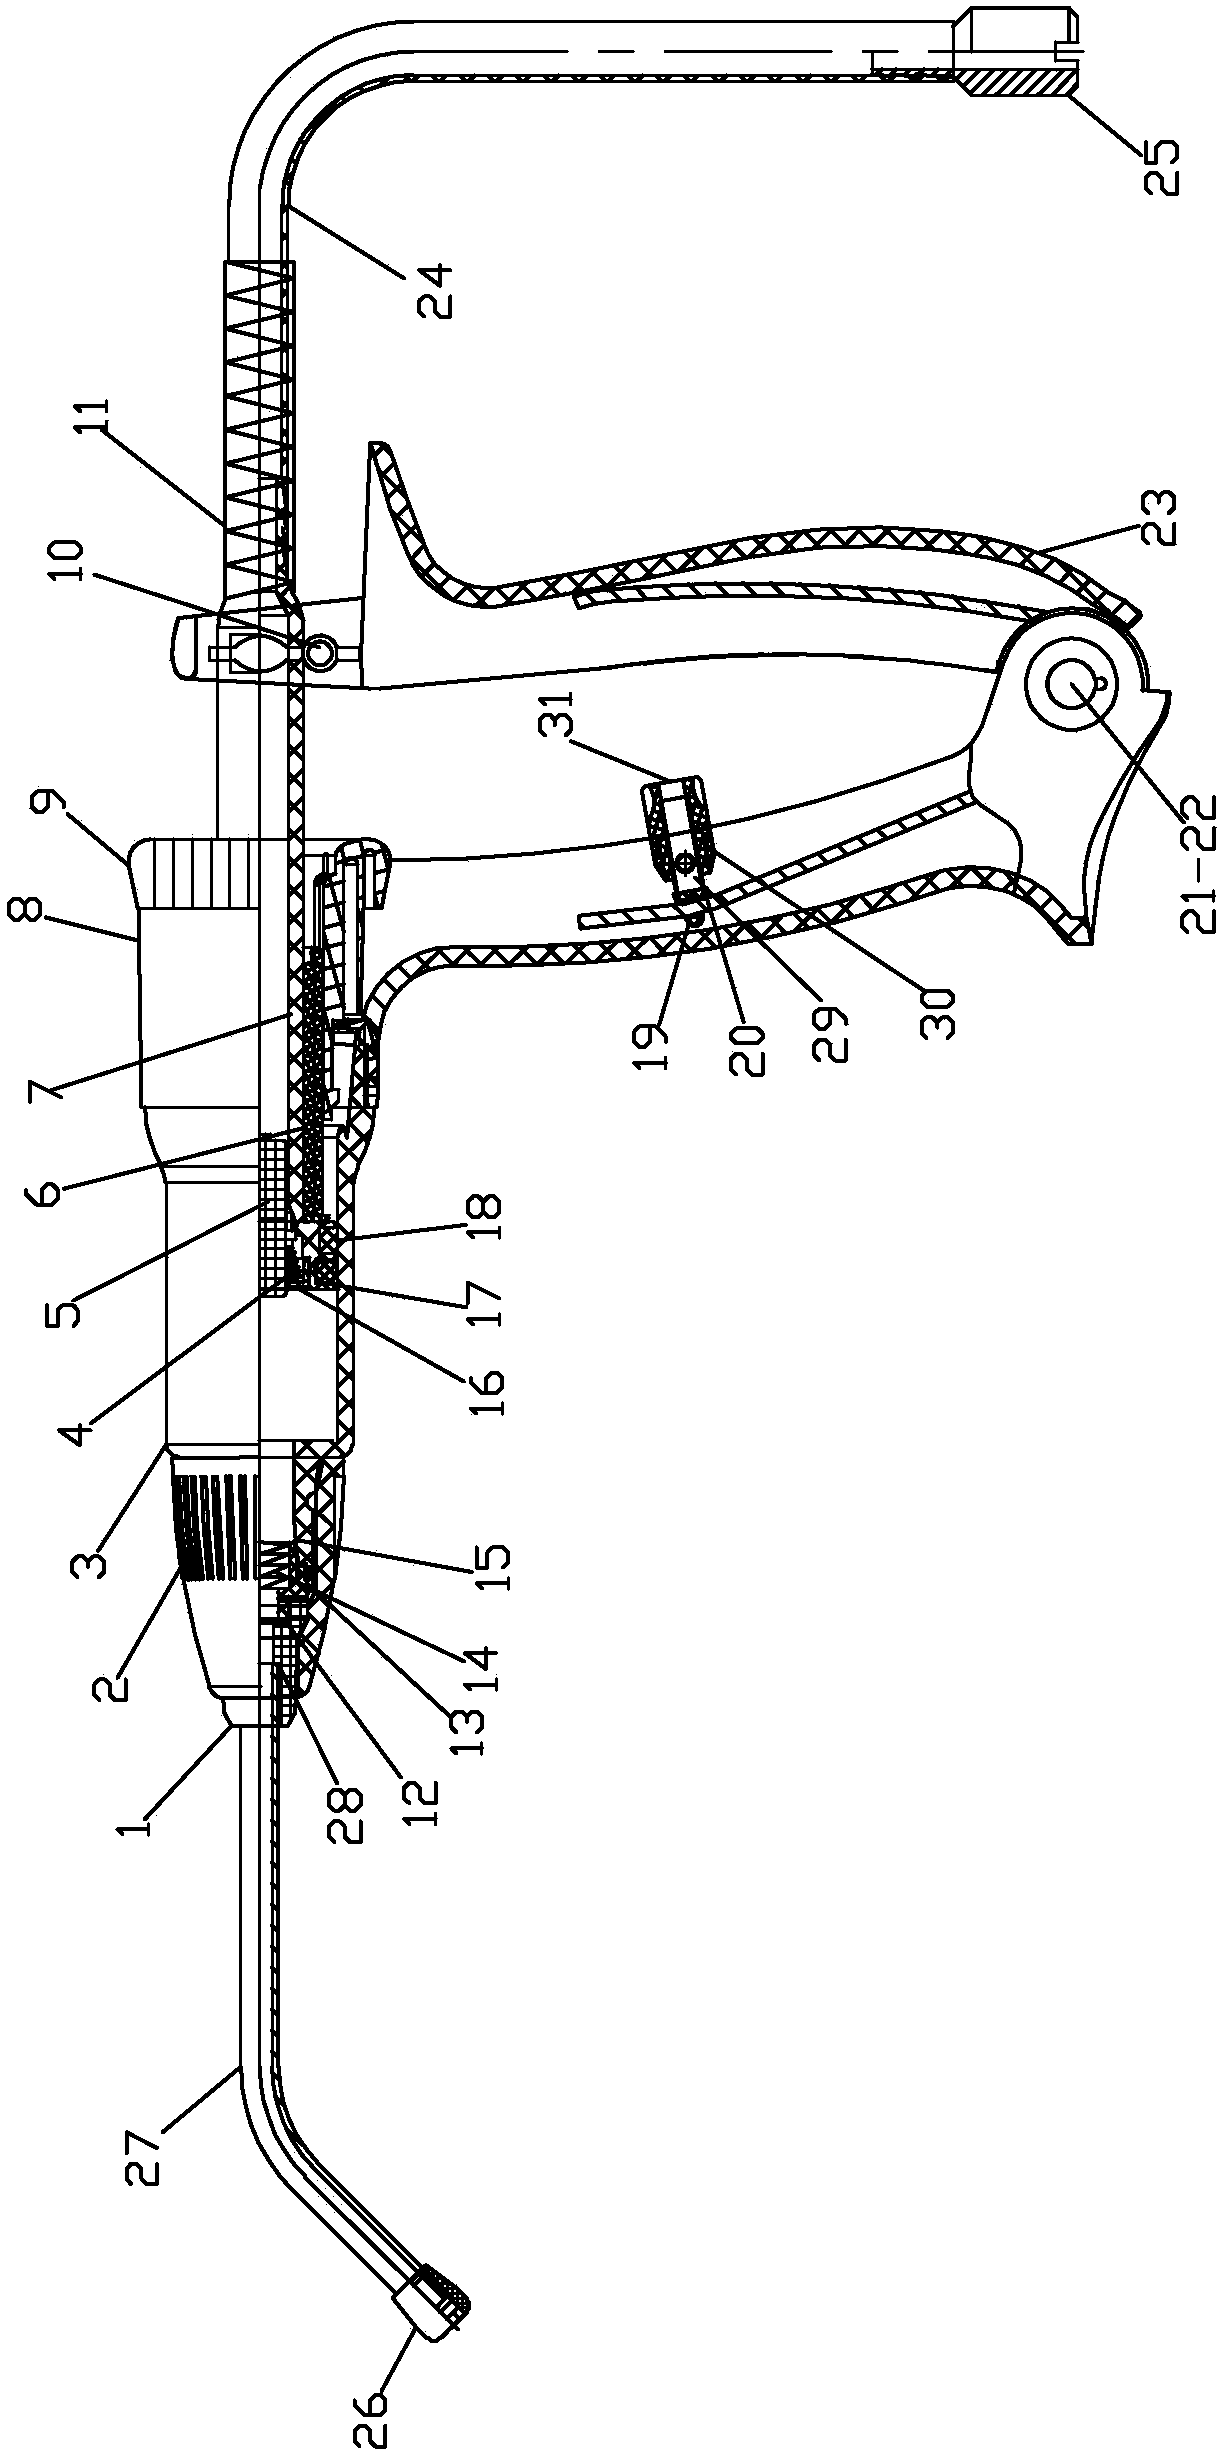 Continuous medicine filling injector